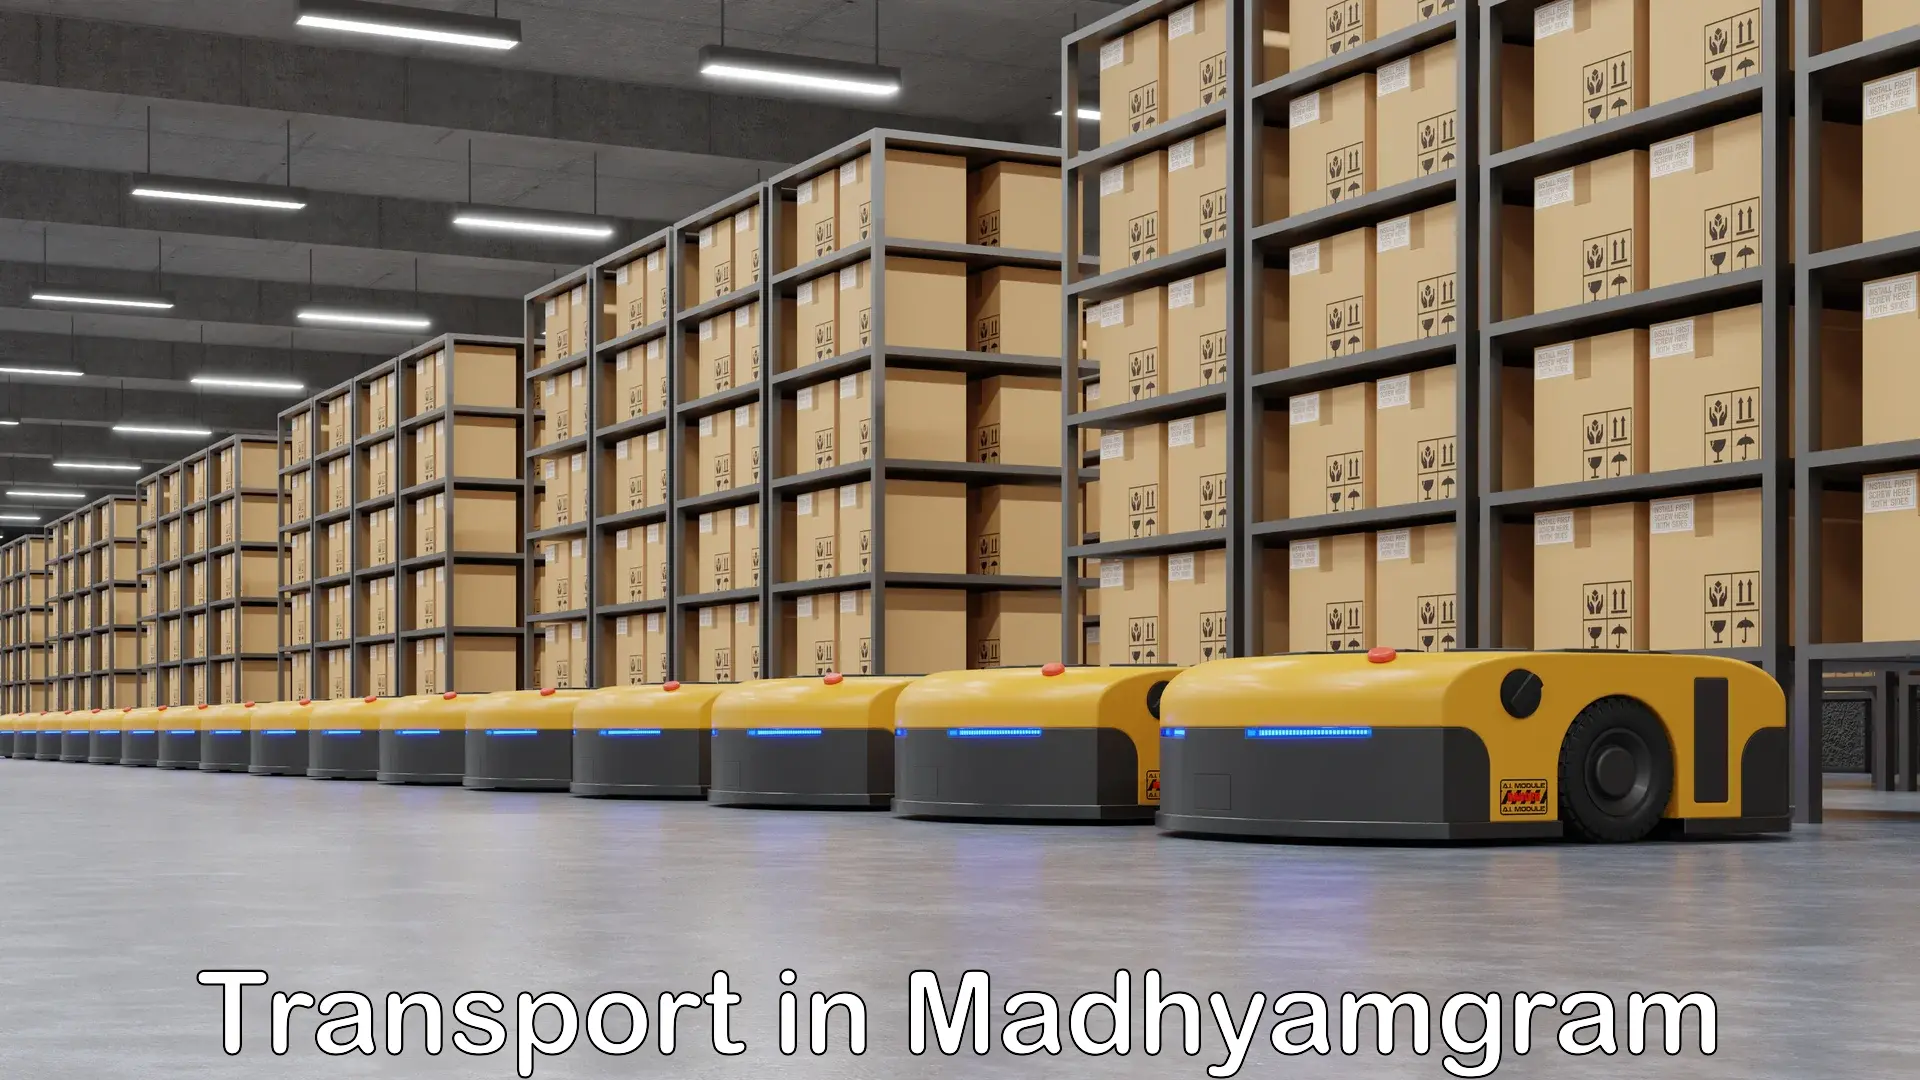 Transportation services in Madhyamgram